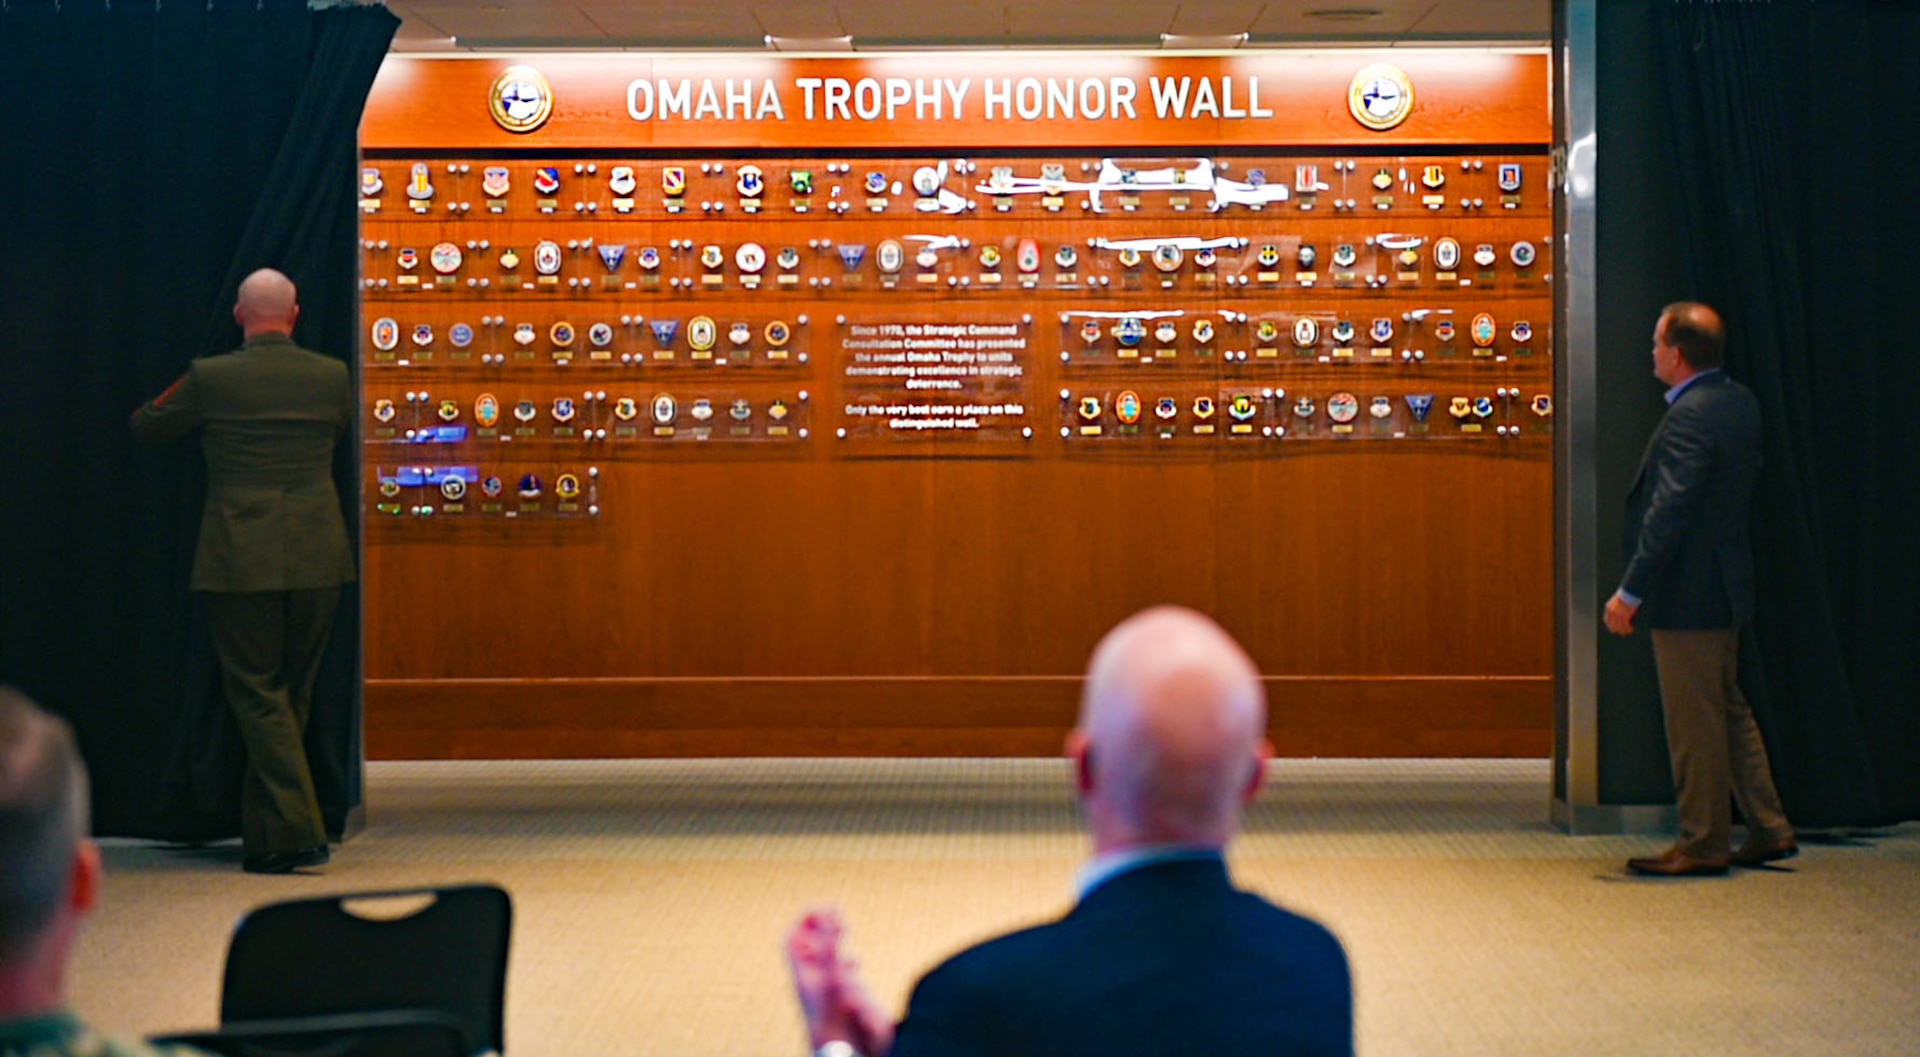 The Omaha Trophy Honor Wall showcases 125 patches from every unit that has received the award in chronological order with room for future recipient units.